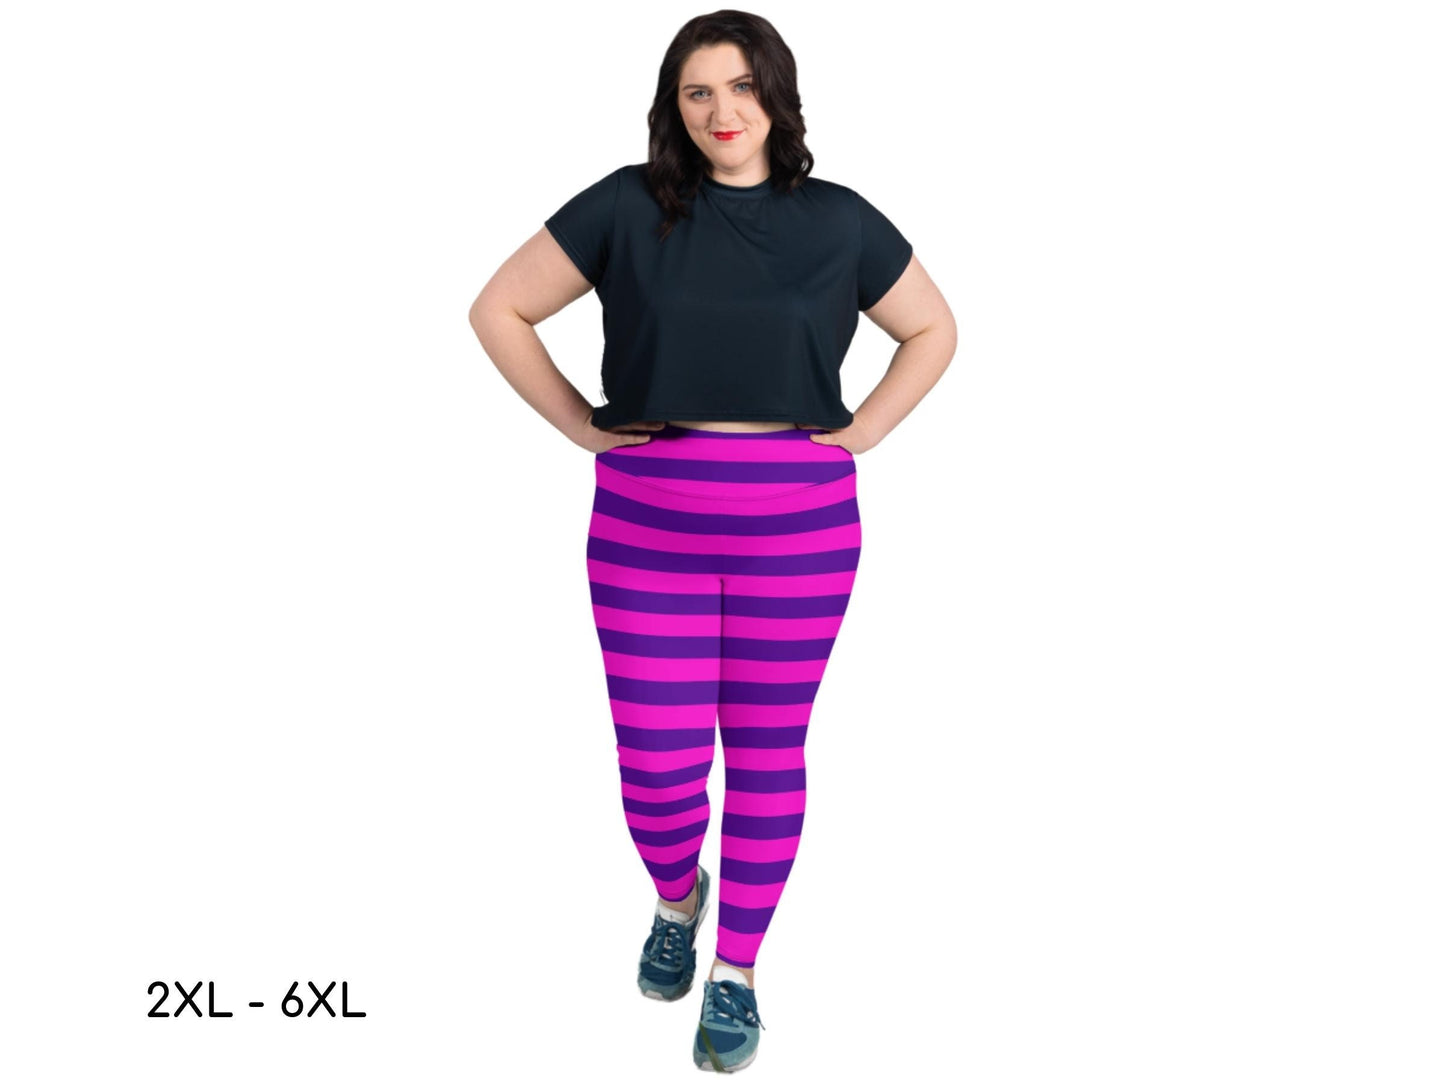 Cheshire Cat Inspired Plus Size Yoga Leggings, Alice in Wonderland, Mad HatterTea Party, Adult Halloween Costume, Sexy BBW, Gift for Her